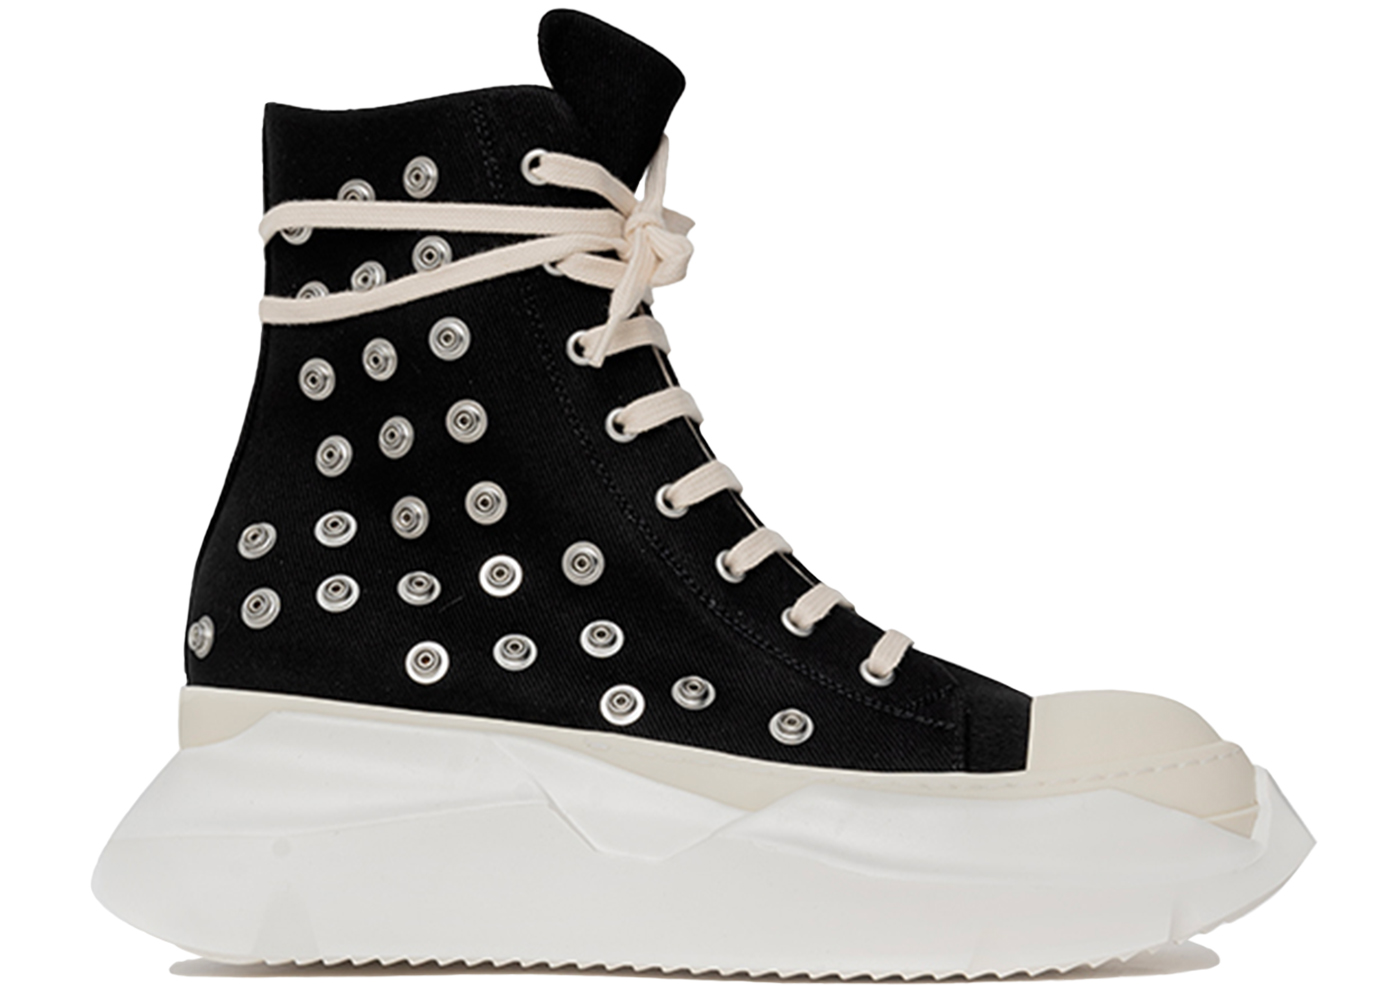 Rick Owens DRKSHDW Abstract Sneaks Studded Eyelets Black